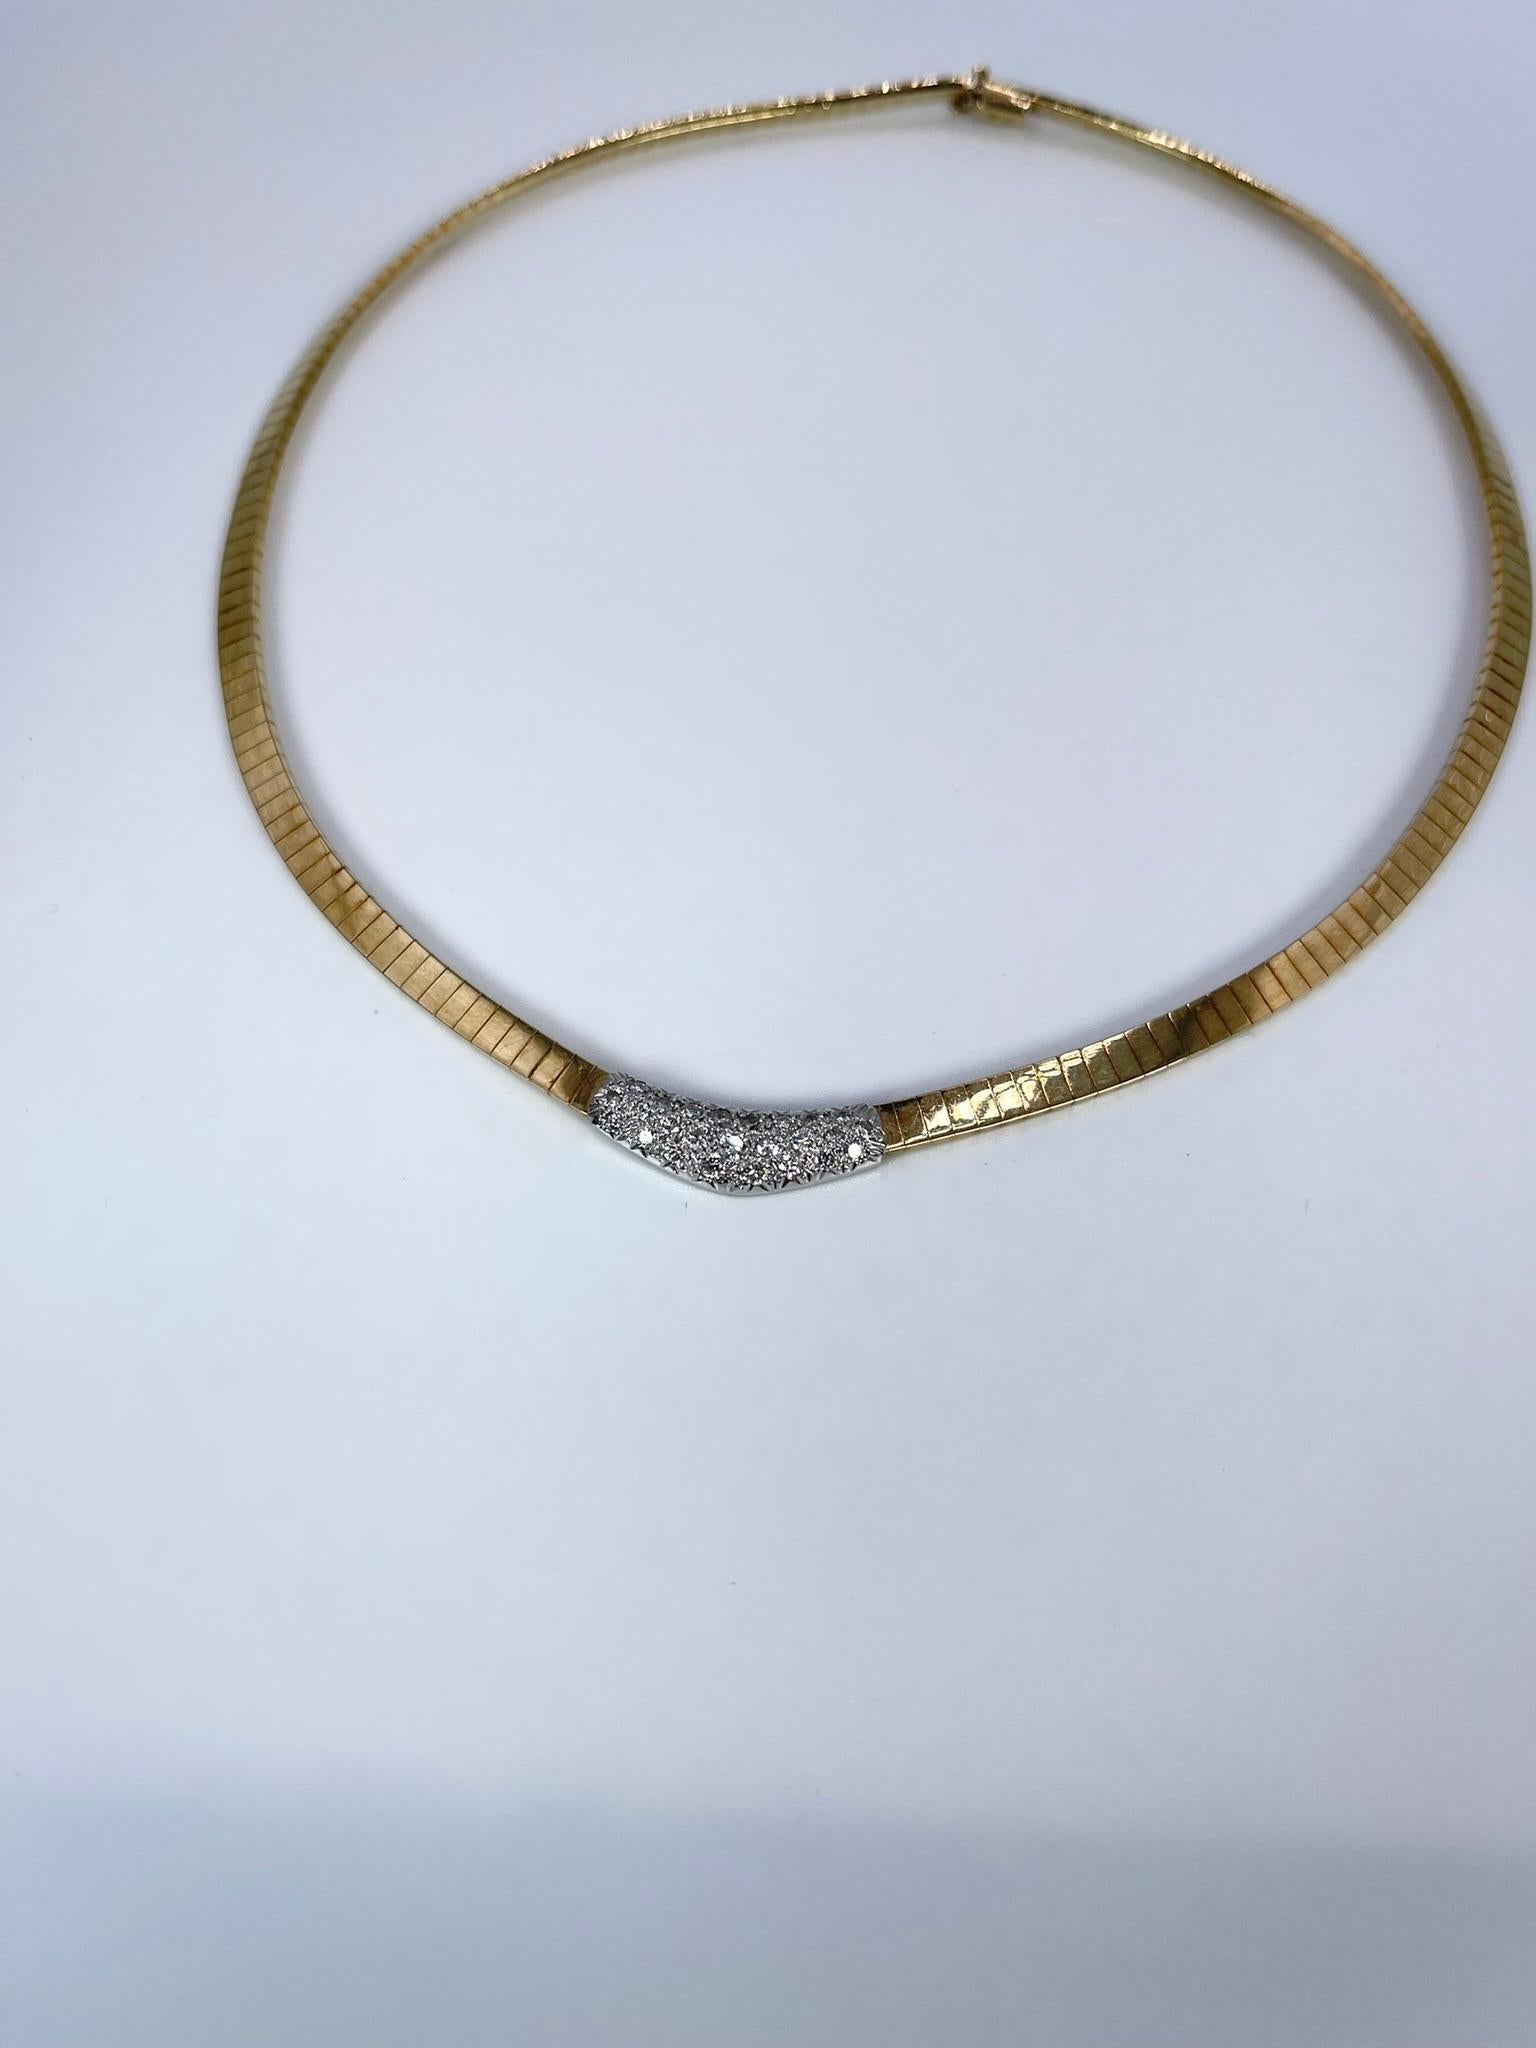 Round Cut Diamond Necklace 14Kt Yellow Gold Stunning Cocktail Necklace Pave Diamonds For Sale